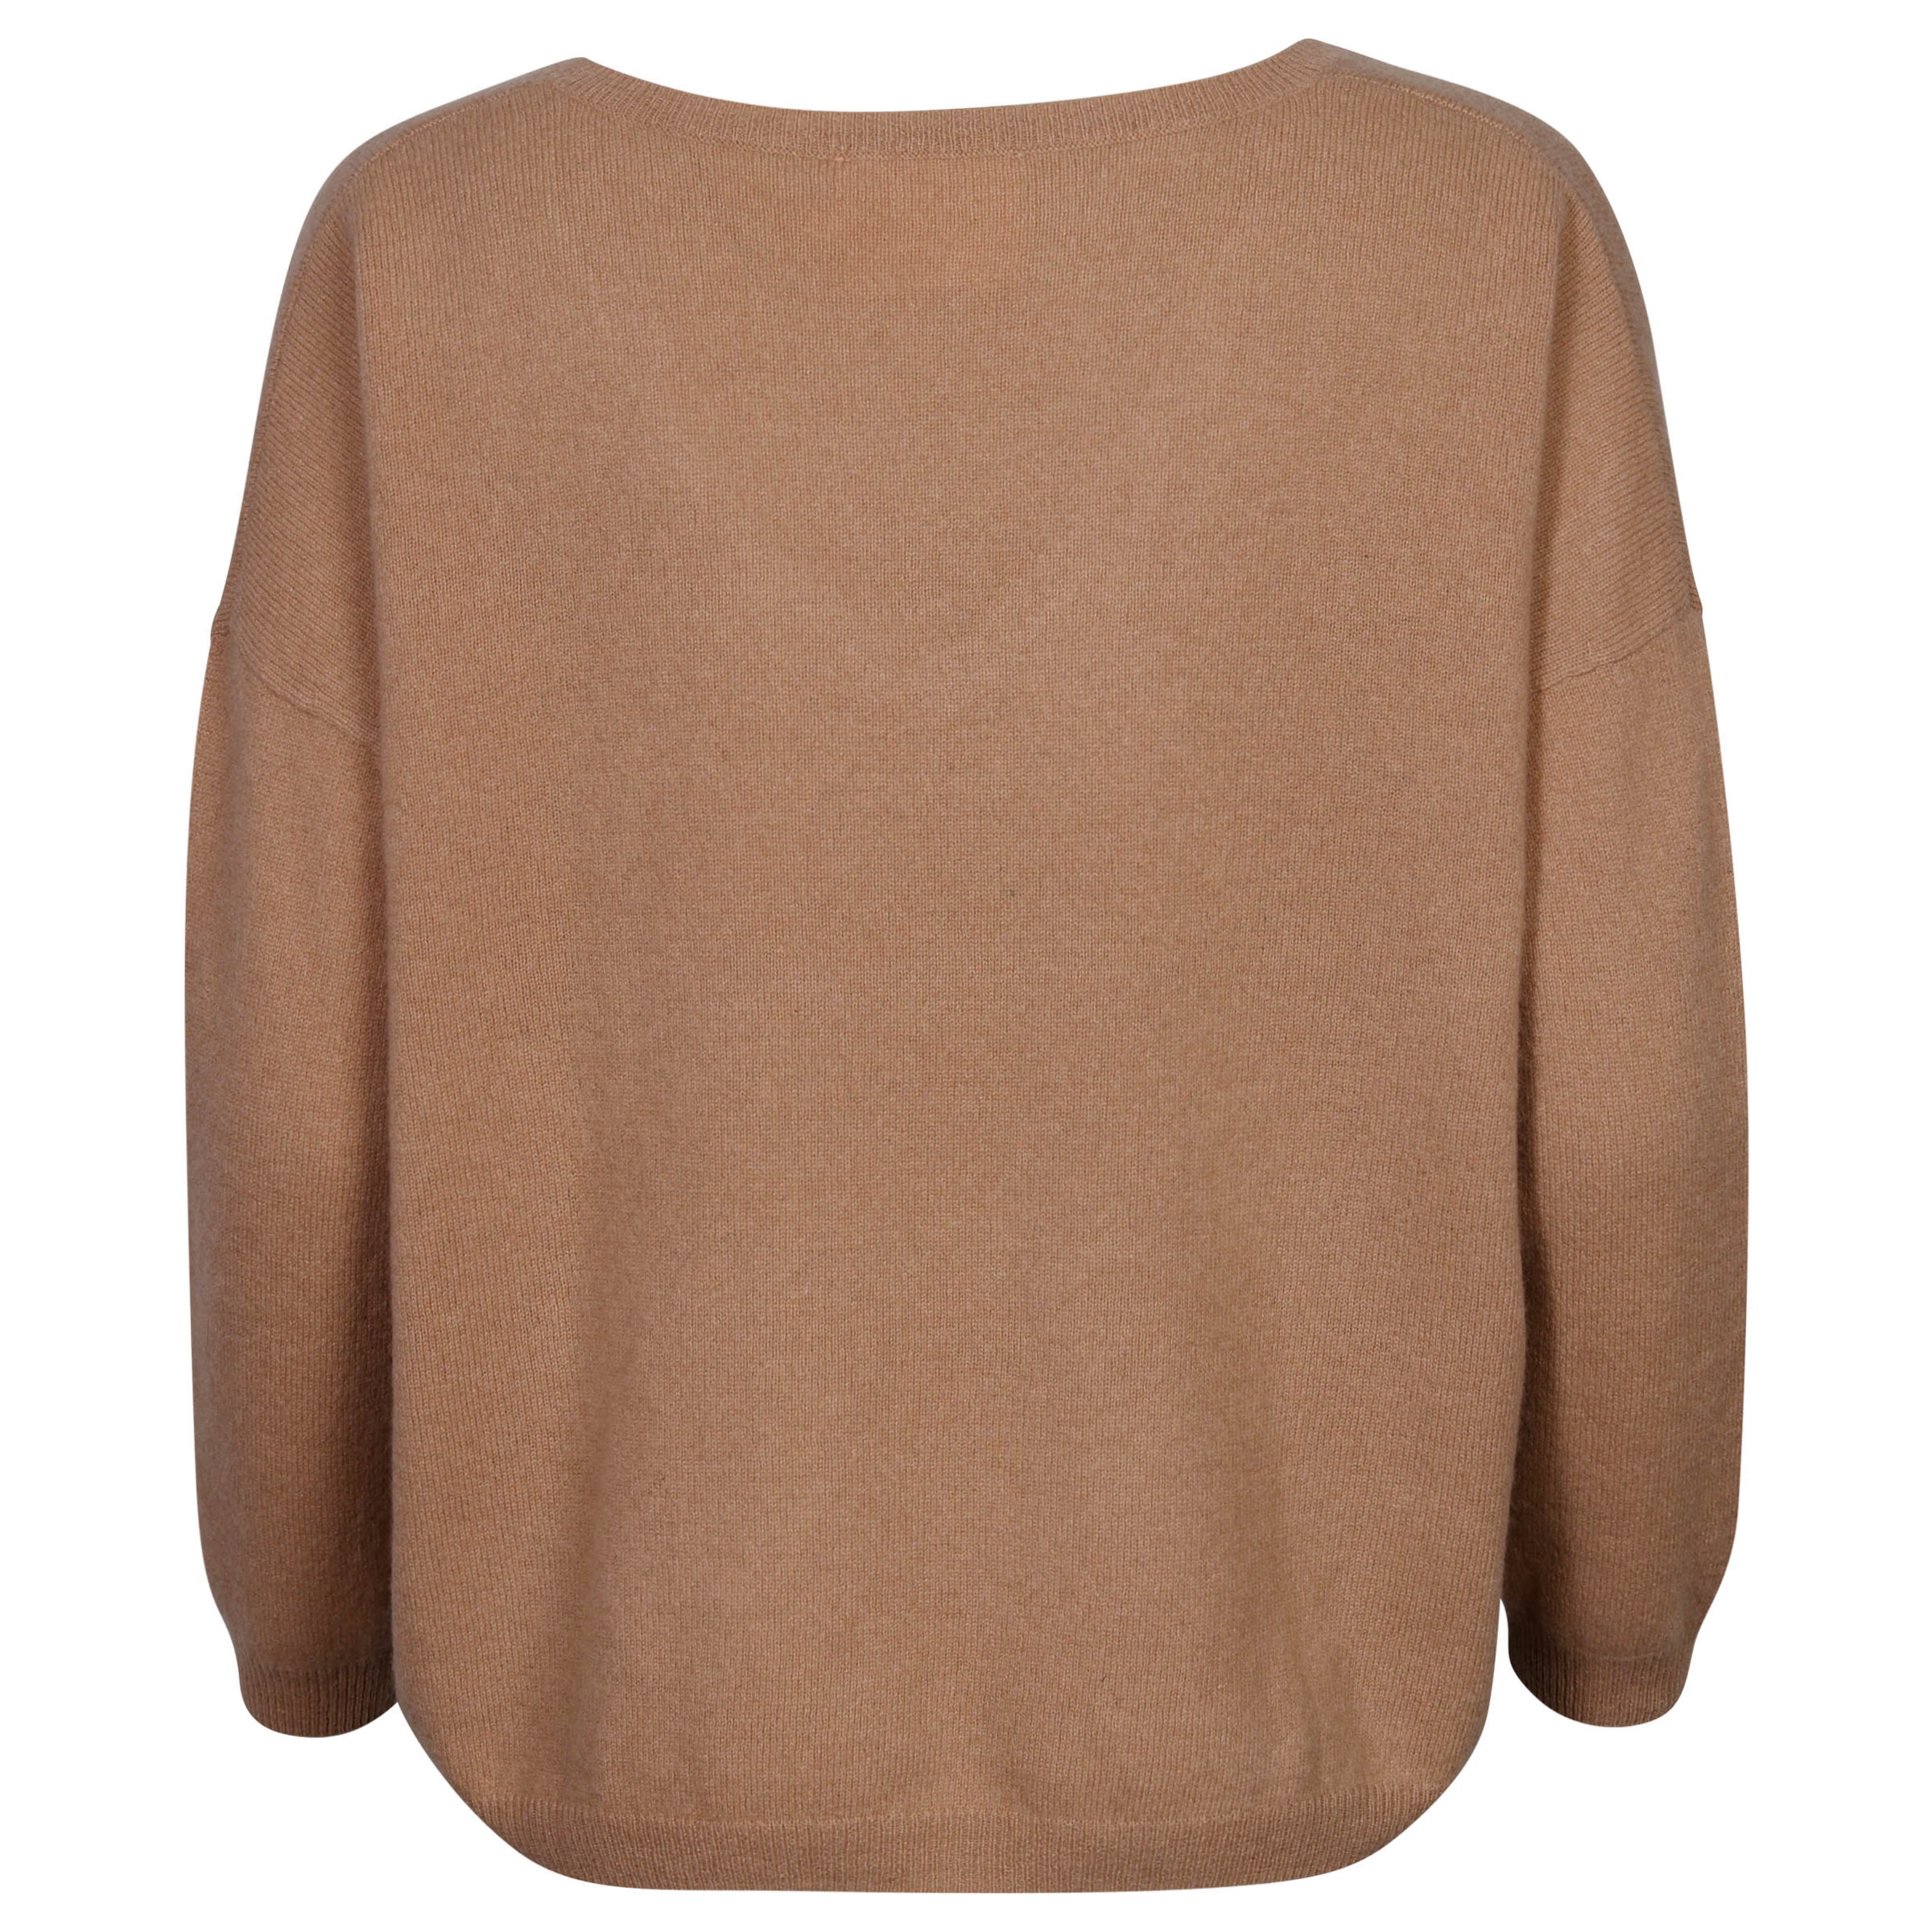 Absolut Cashmere Pullover Angele Camel M